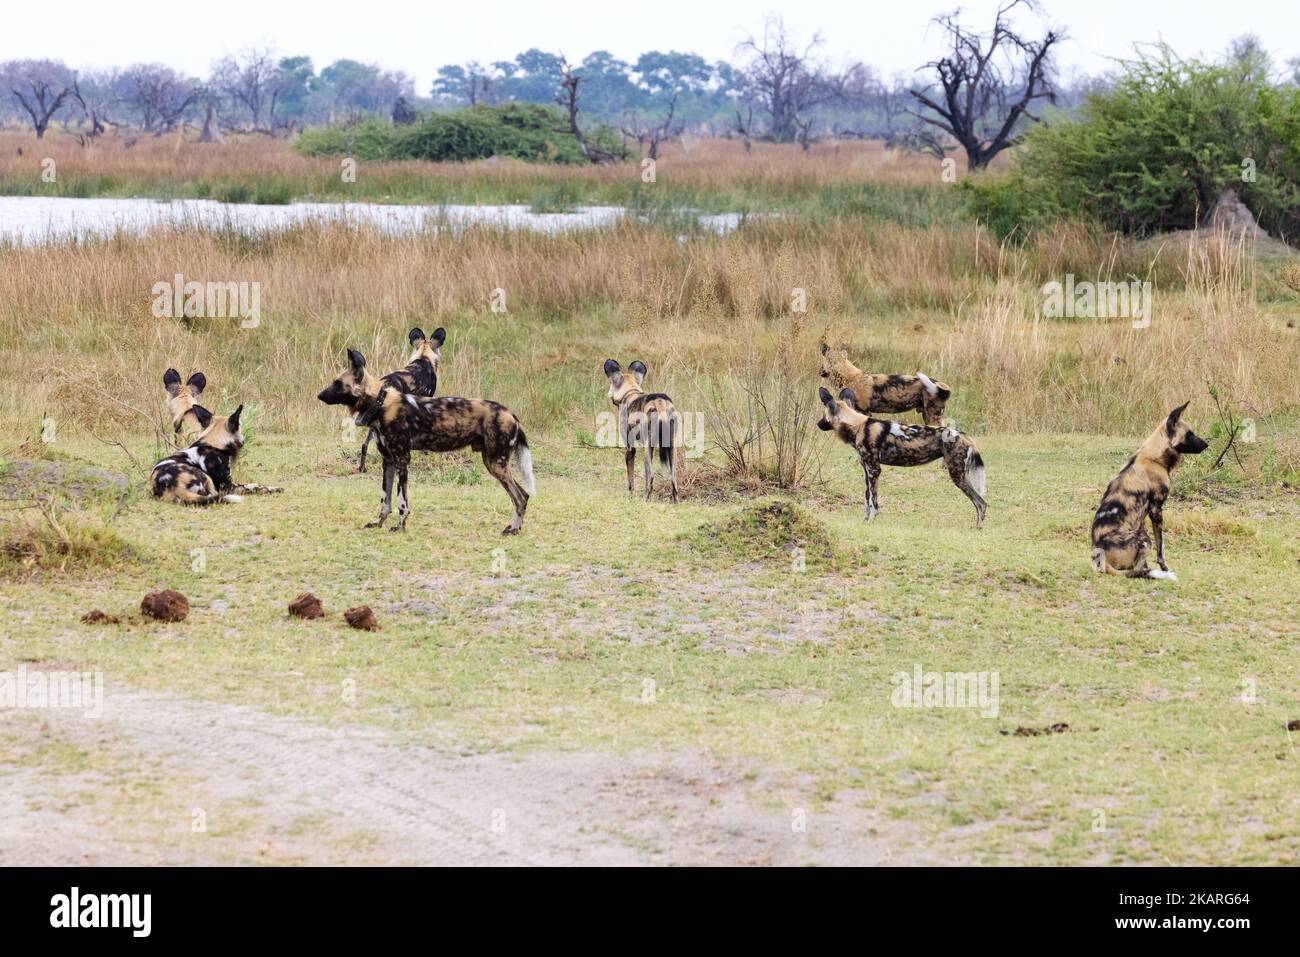 African Wild Dog pack, Lycaon pictus, endangered species, group of African wild dogs in Moremi Game Reserve, Okavango Delta, Botswana Africa Stock Photo